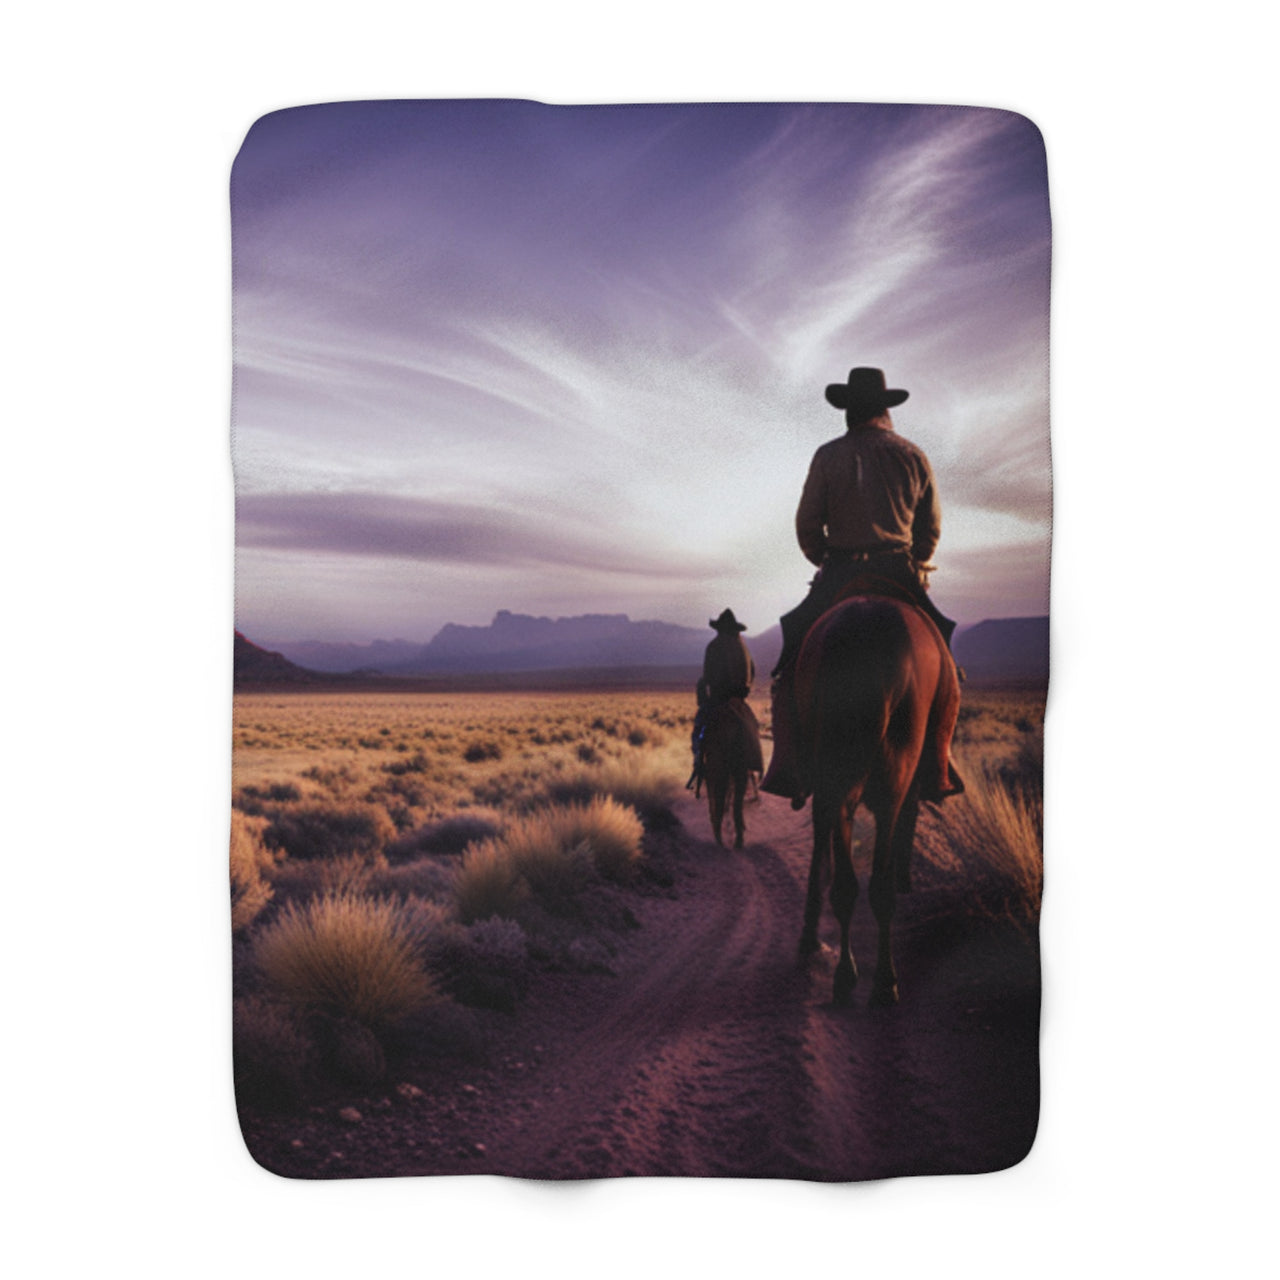 Riding Into the Sunset Sherpa Fleece Blanket